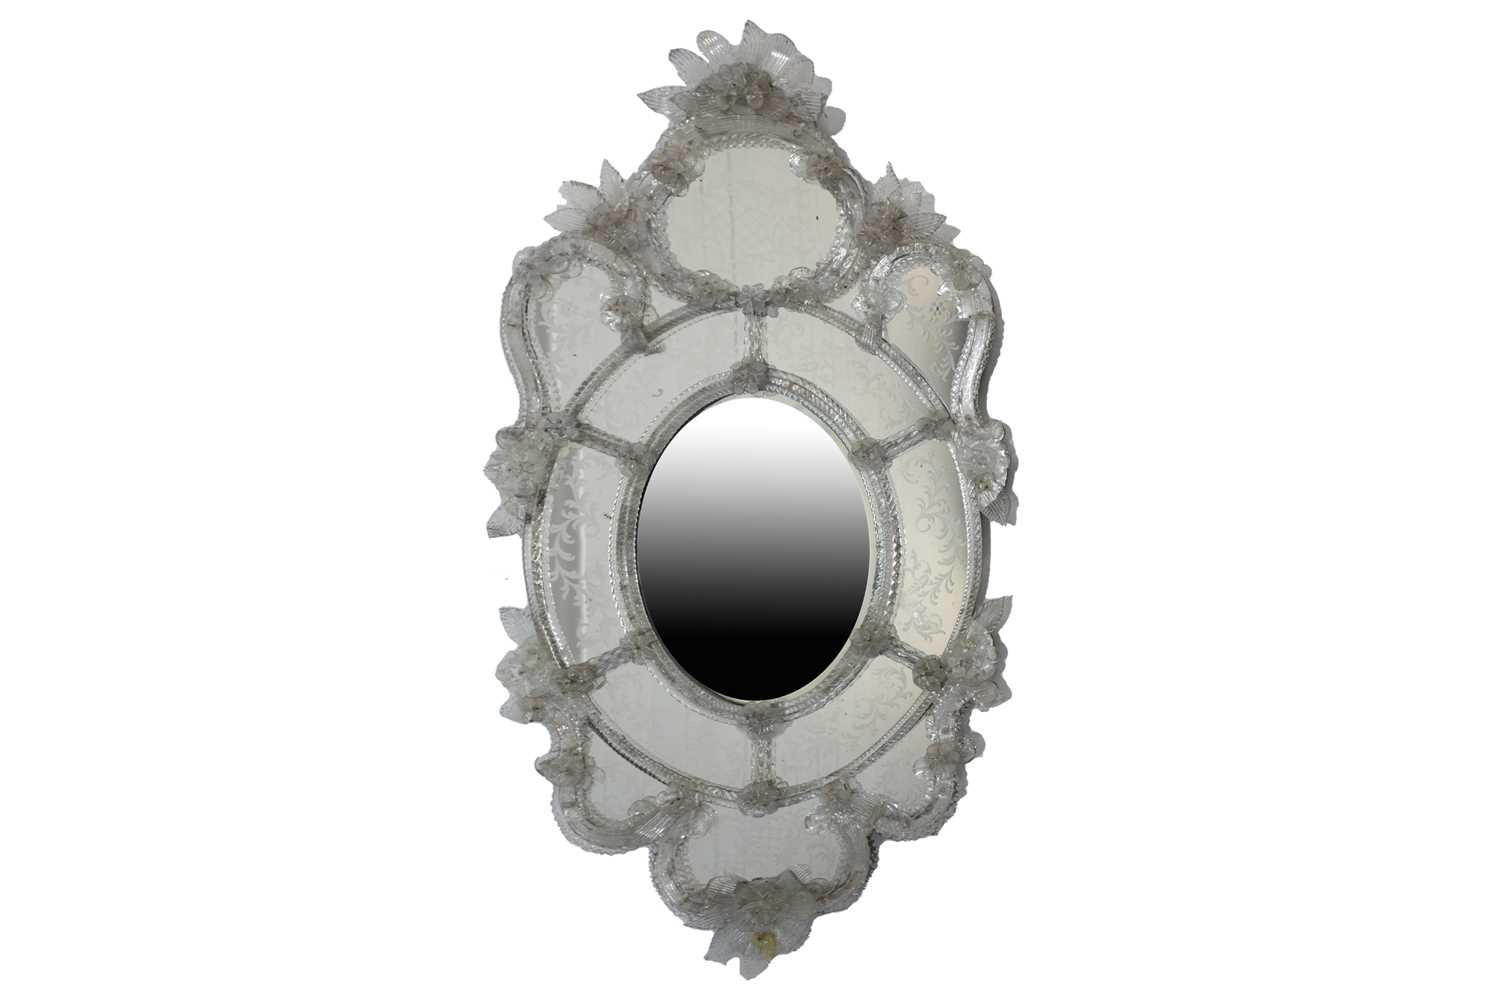 A Venetian cartouch form wall mirror, late 19th century, decorated with etched detail and drawn